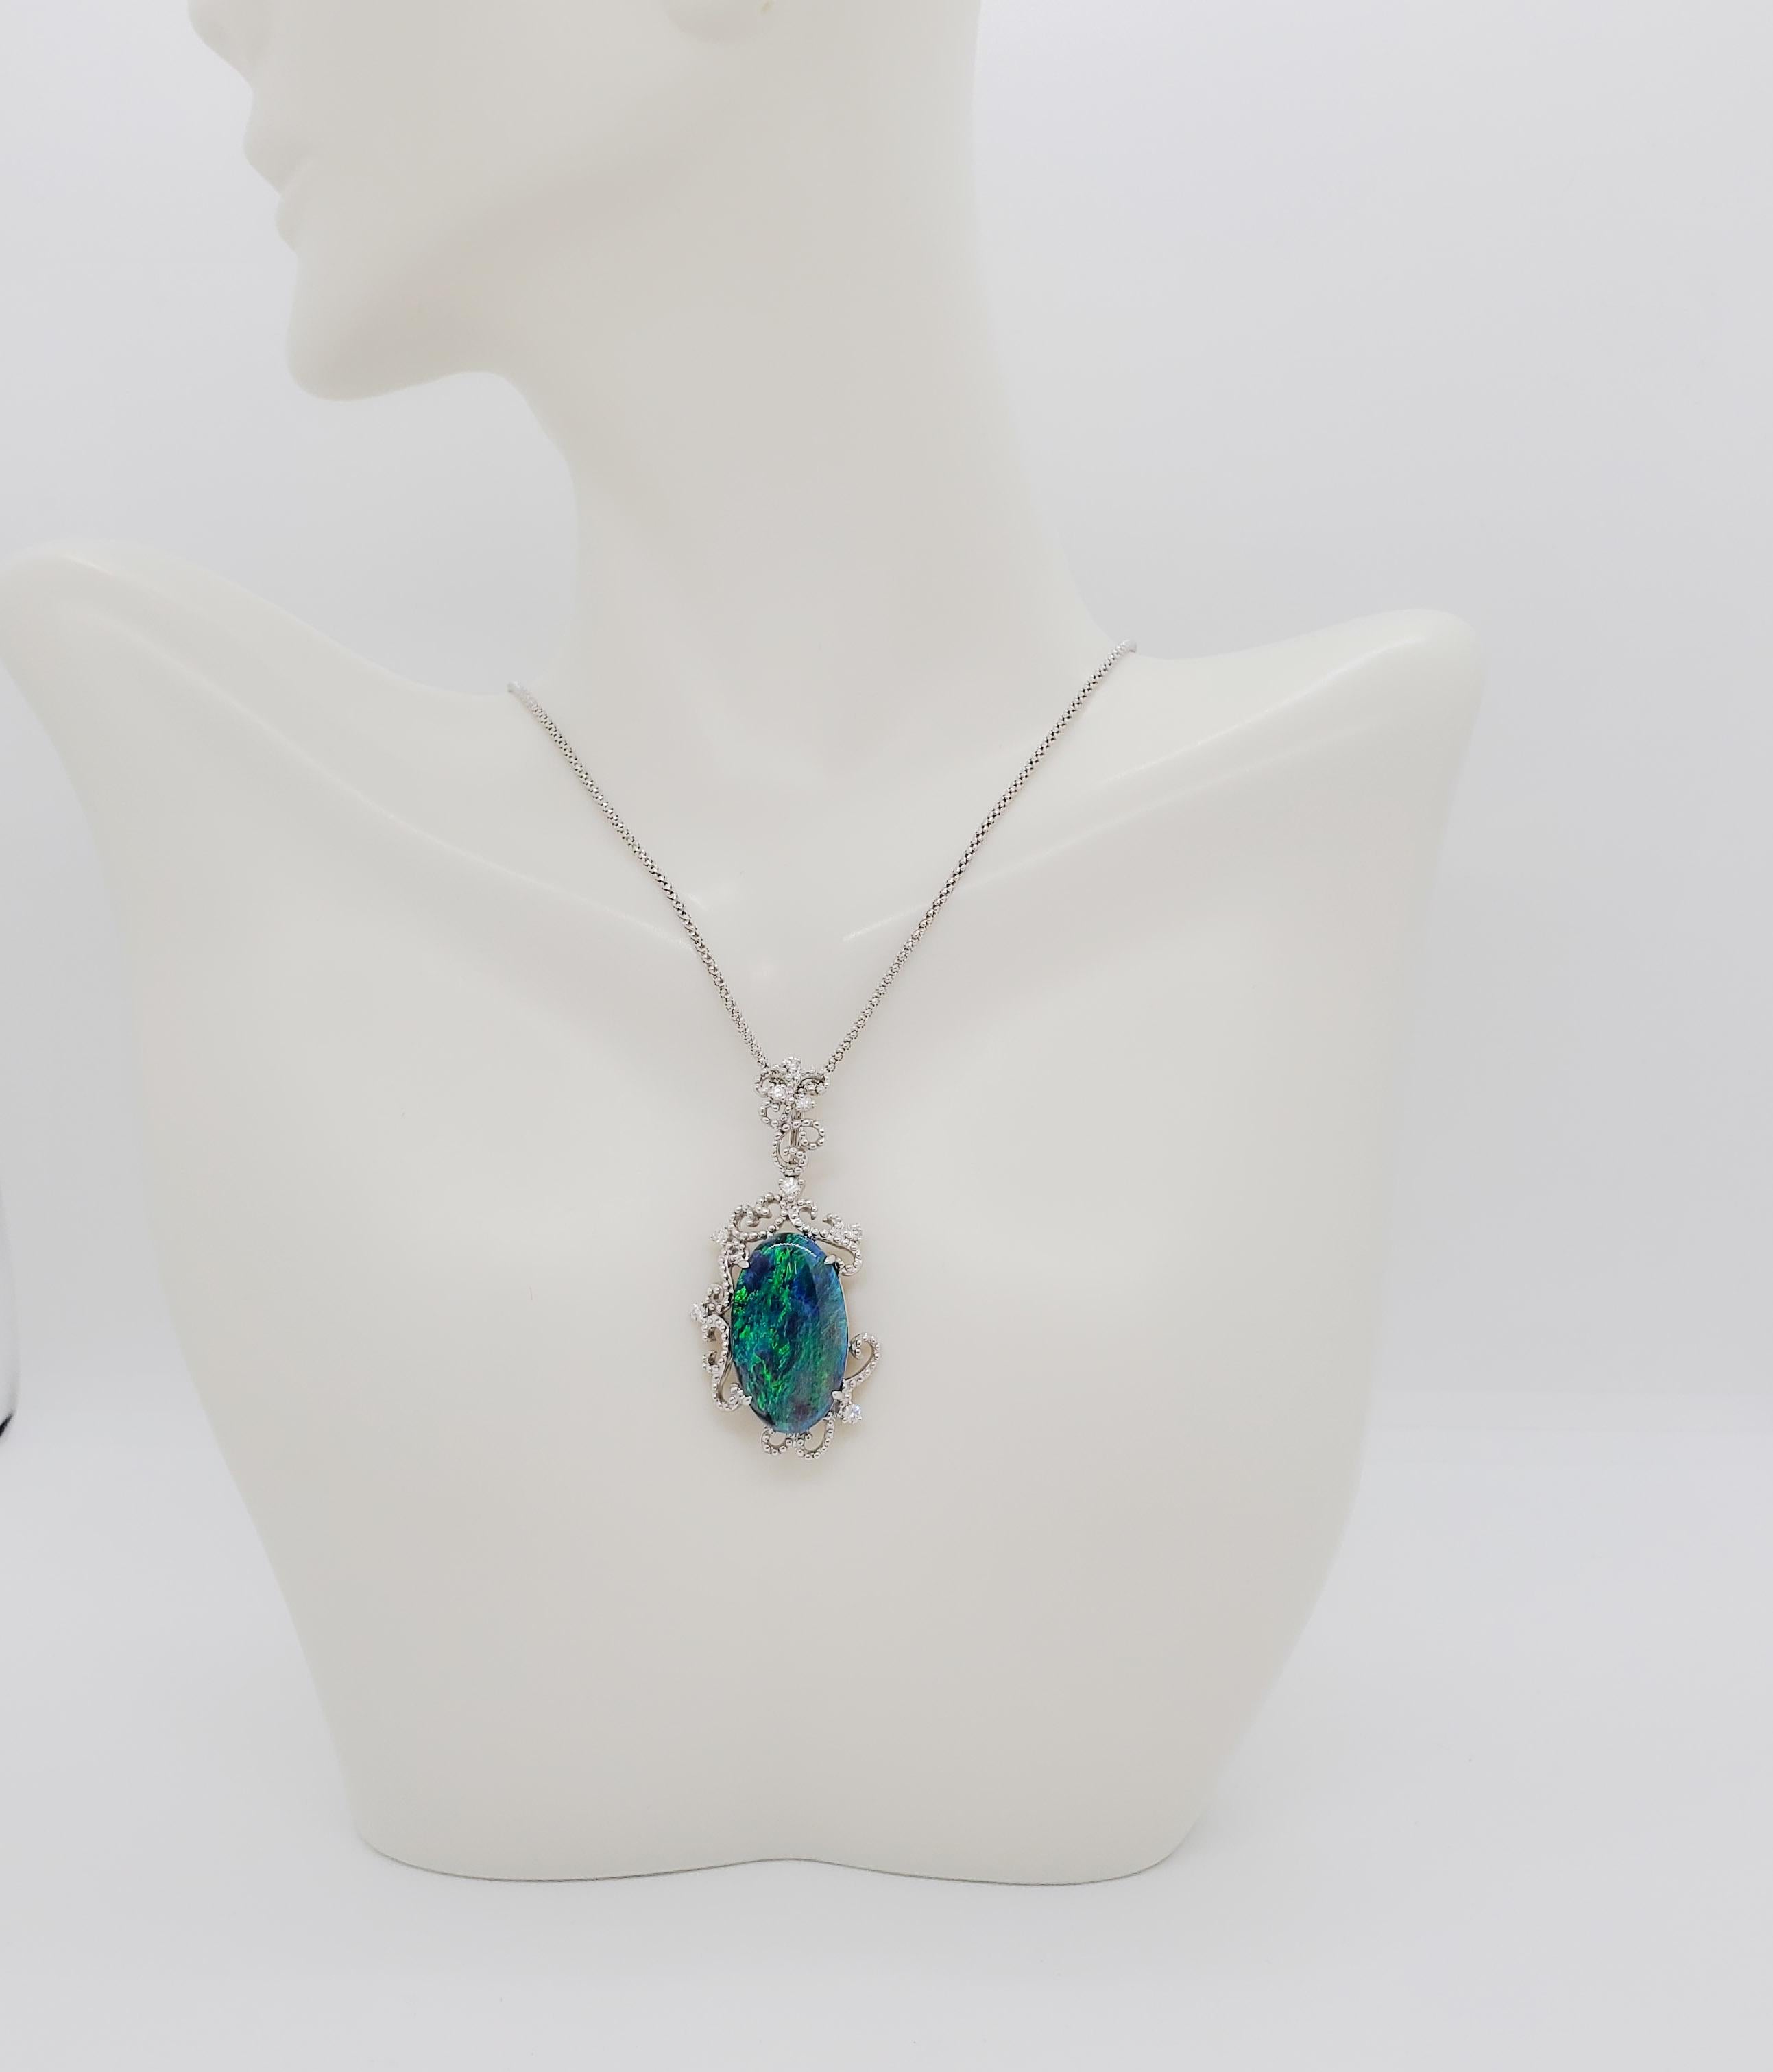 Oval Cut Black Opal and Diamond Pendant Necklace in 18k White Gold